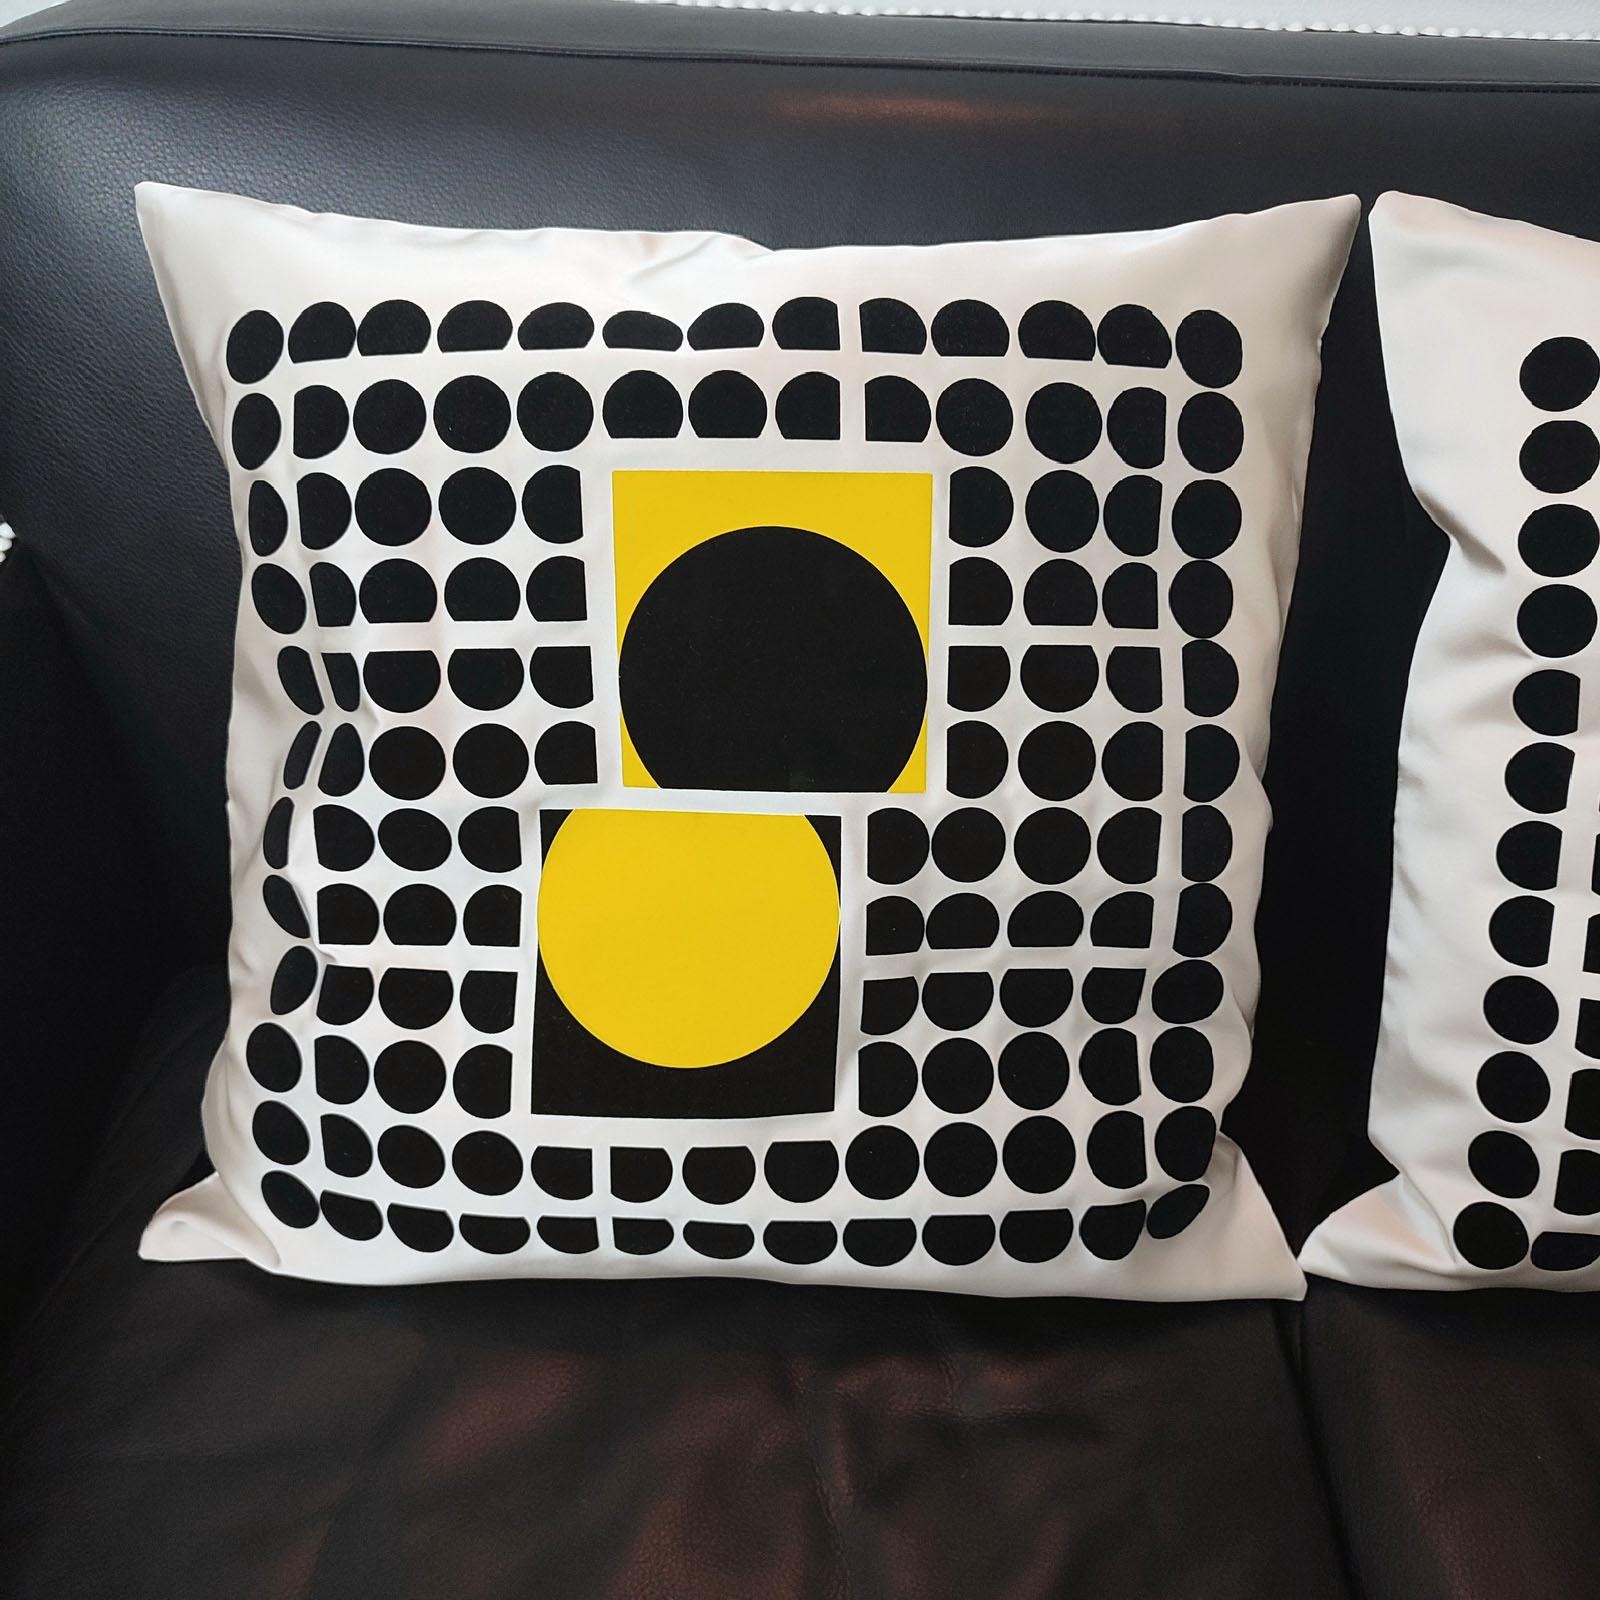 One of a Kind Pair of Pillows, Throw Pillows, Philosophy Pillows 